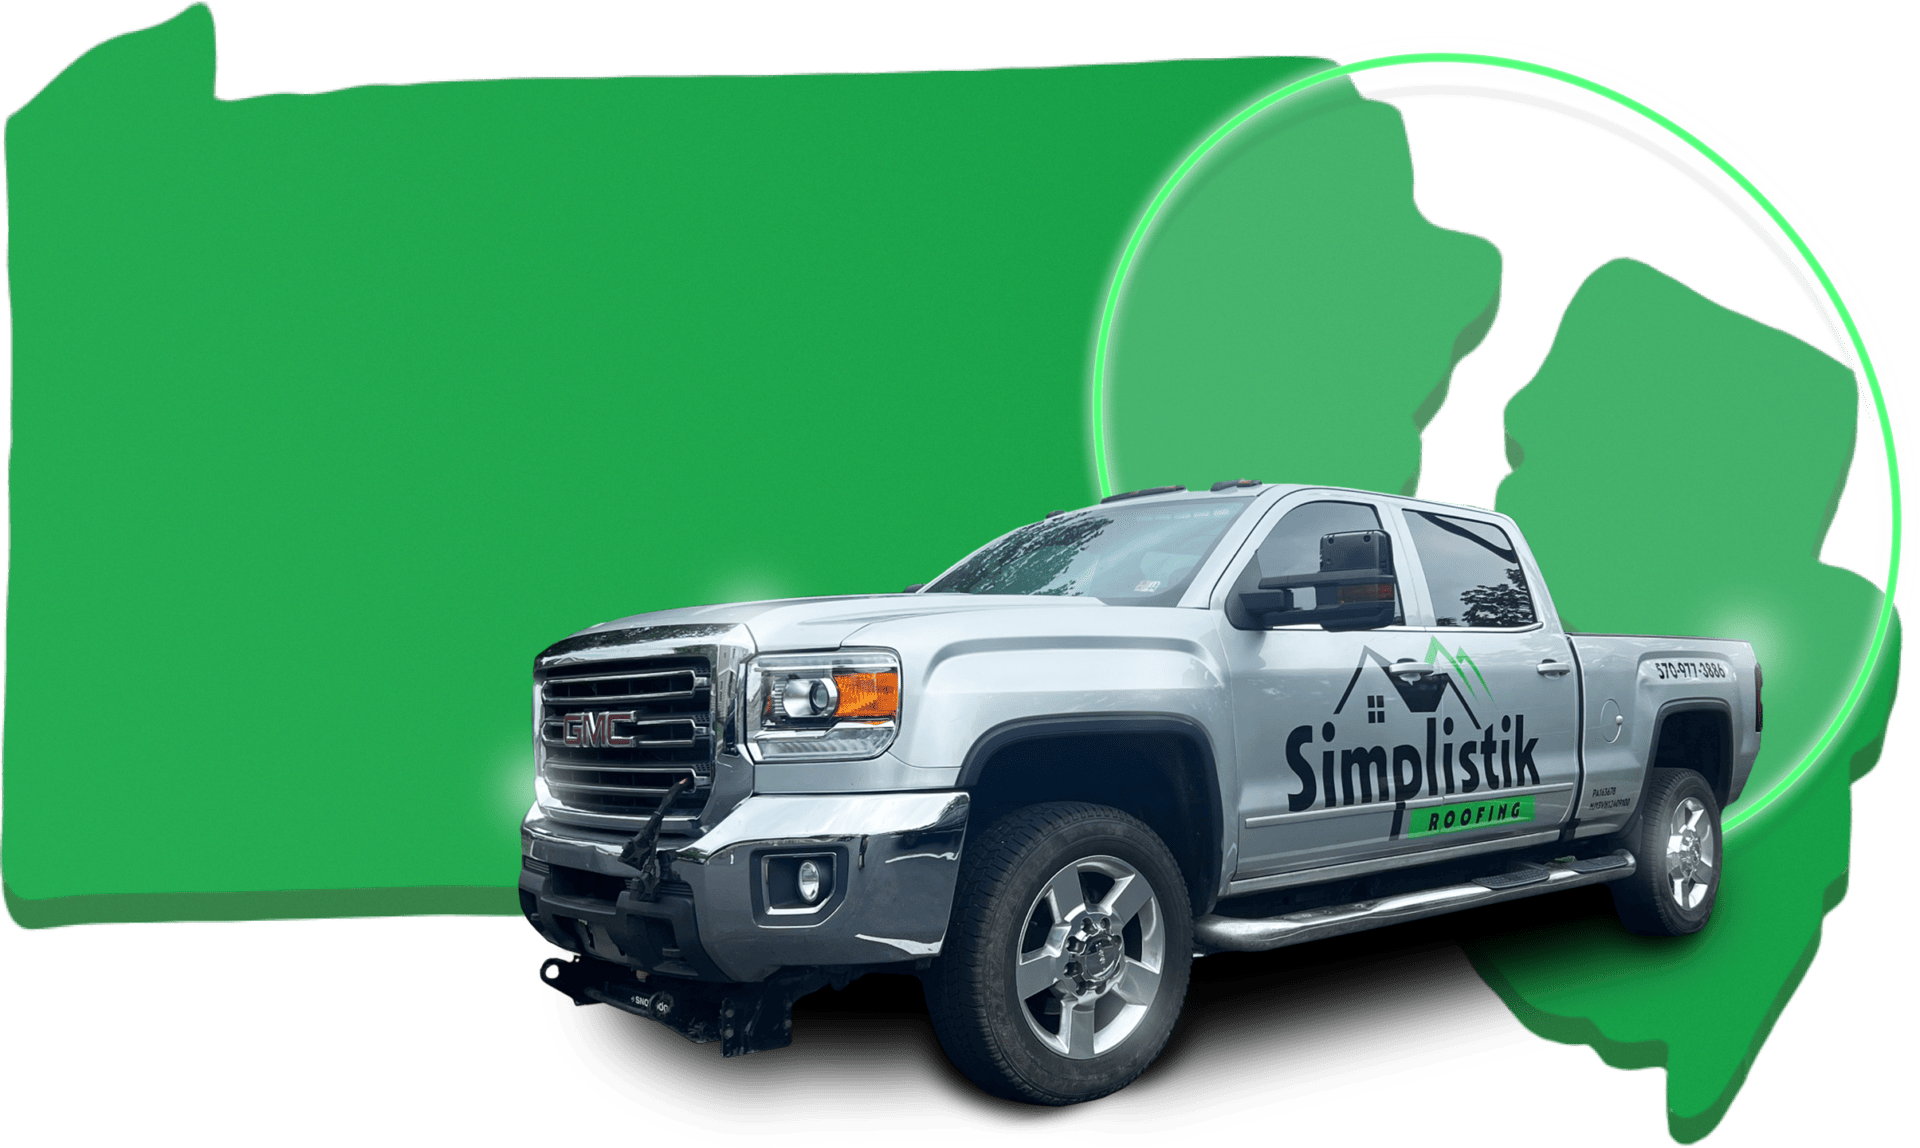 Simplistik Roofing - Green PA and NJ Truck Graphic